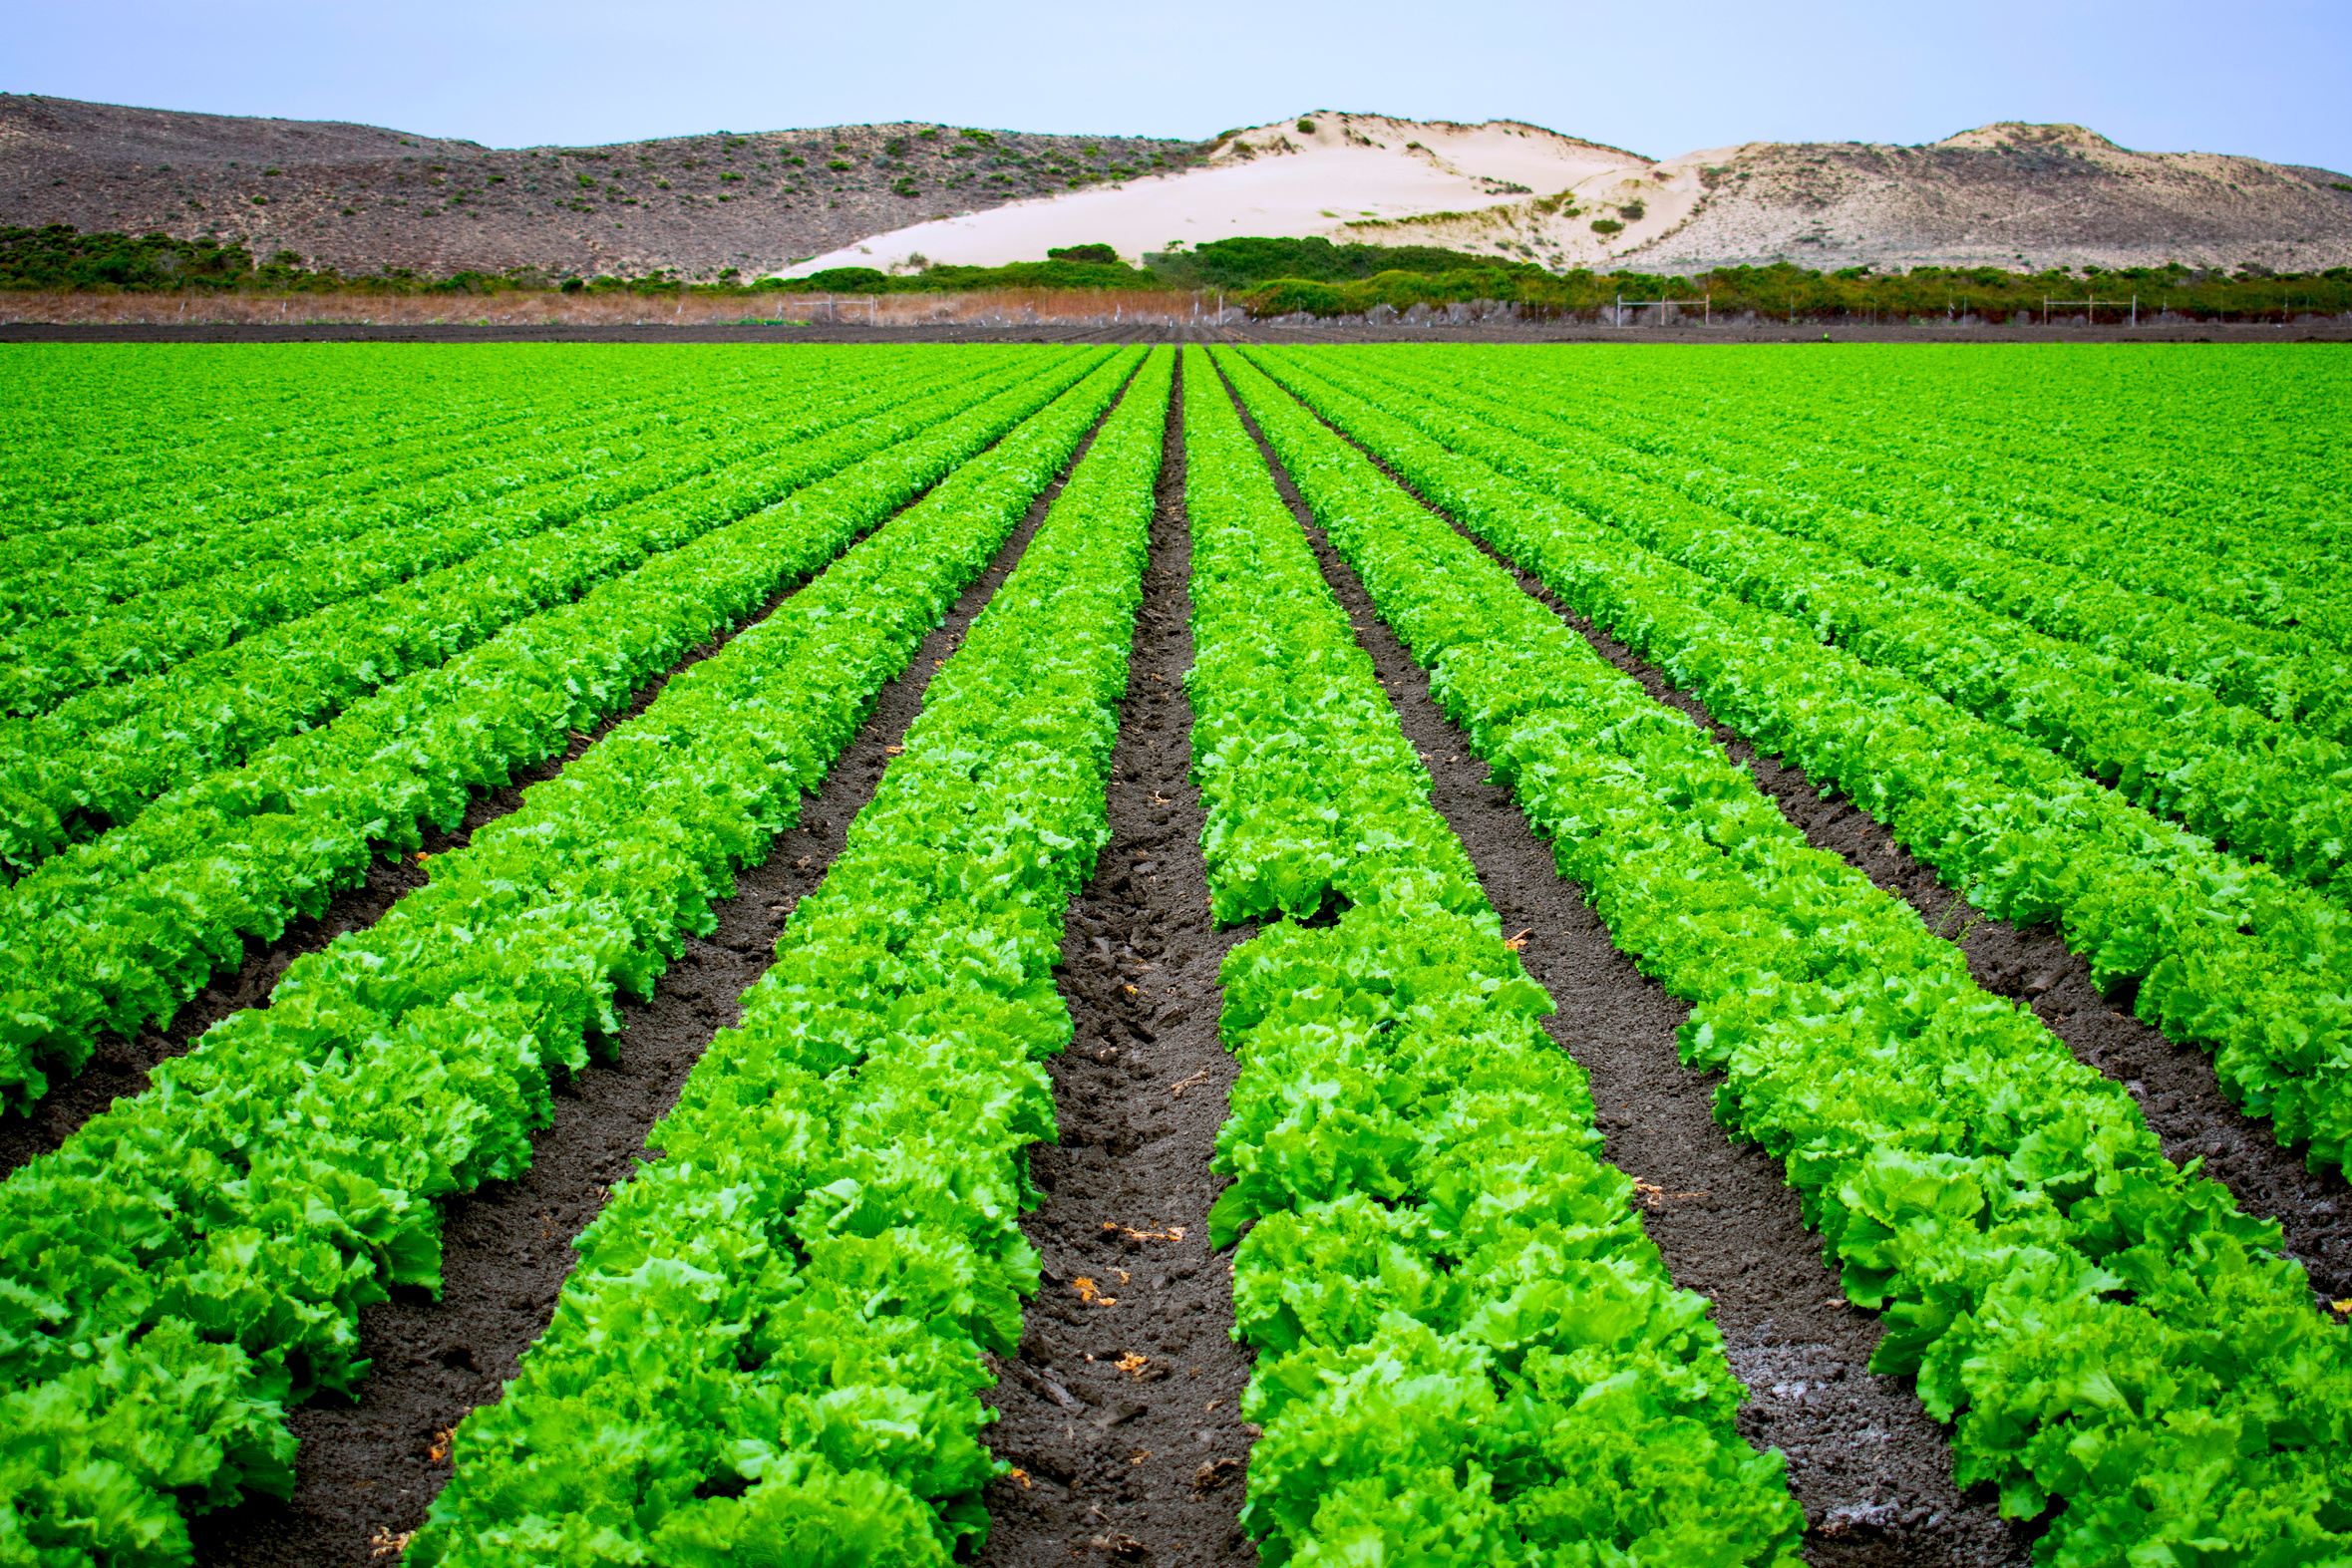  Lettuce Planted in an Agricultural Field